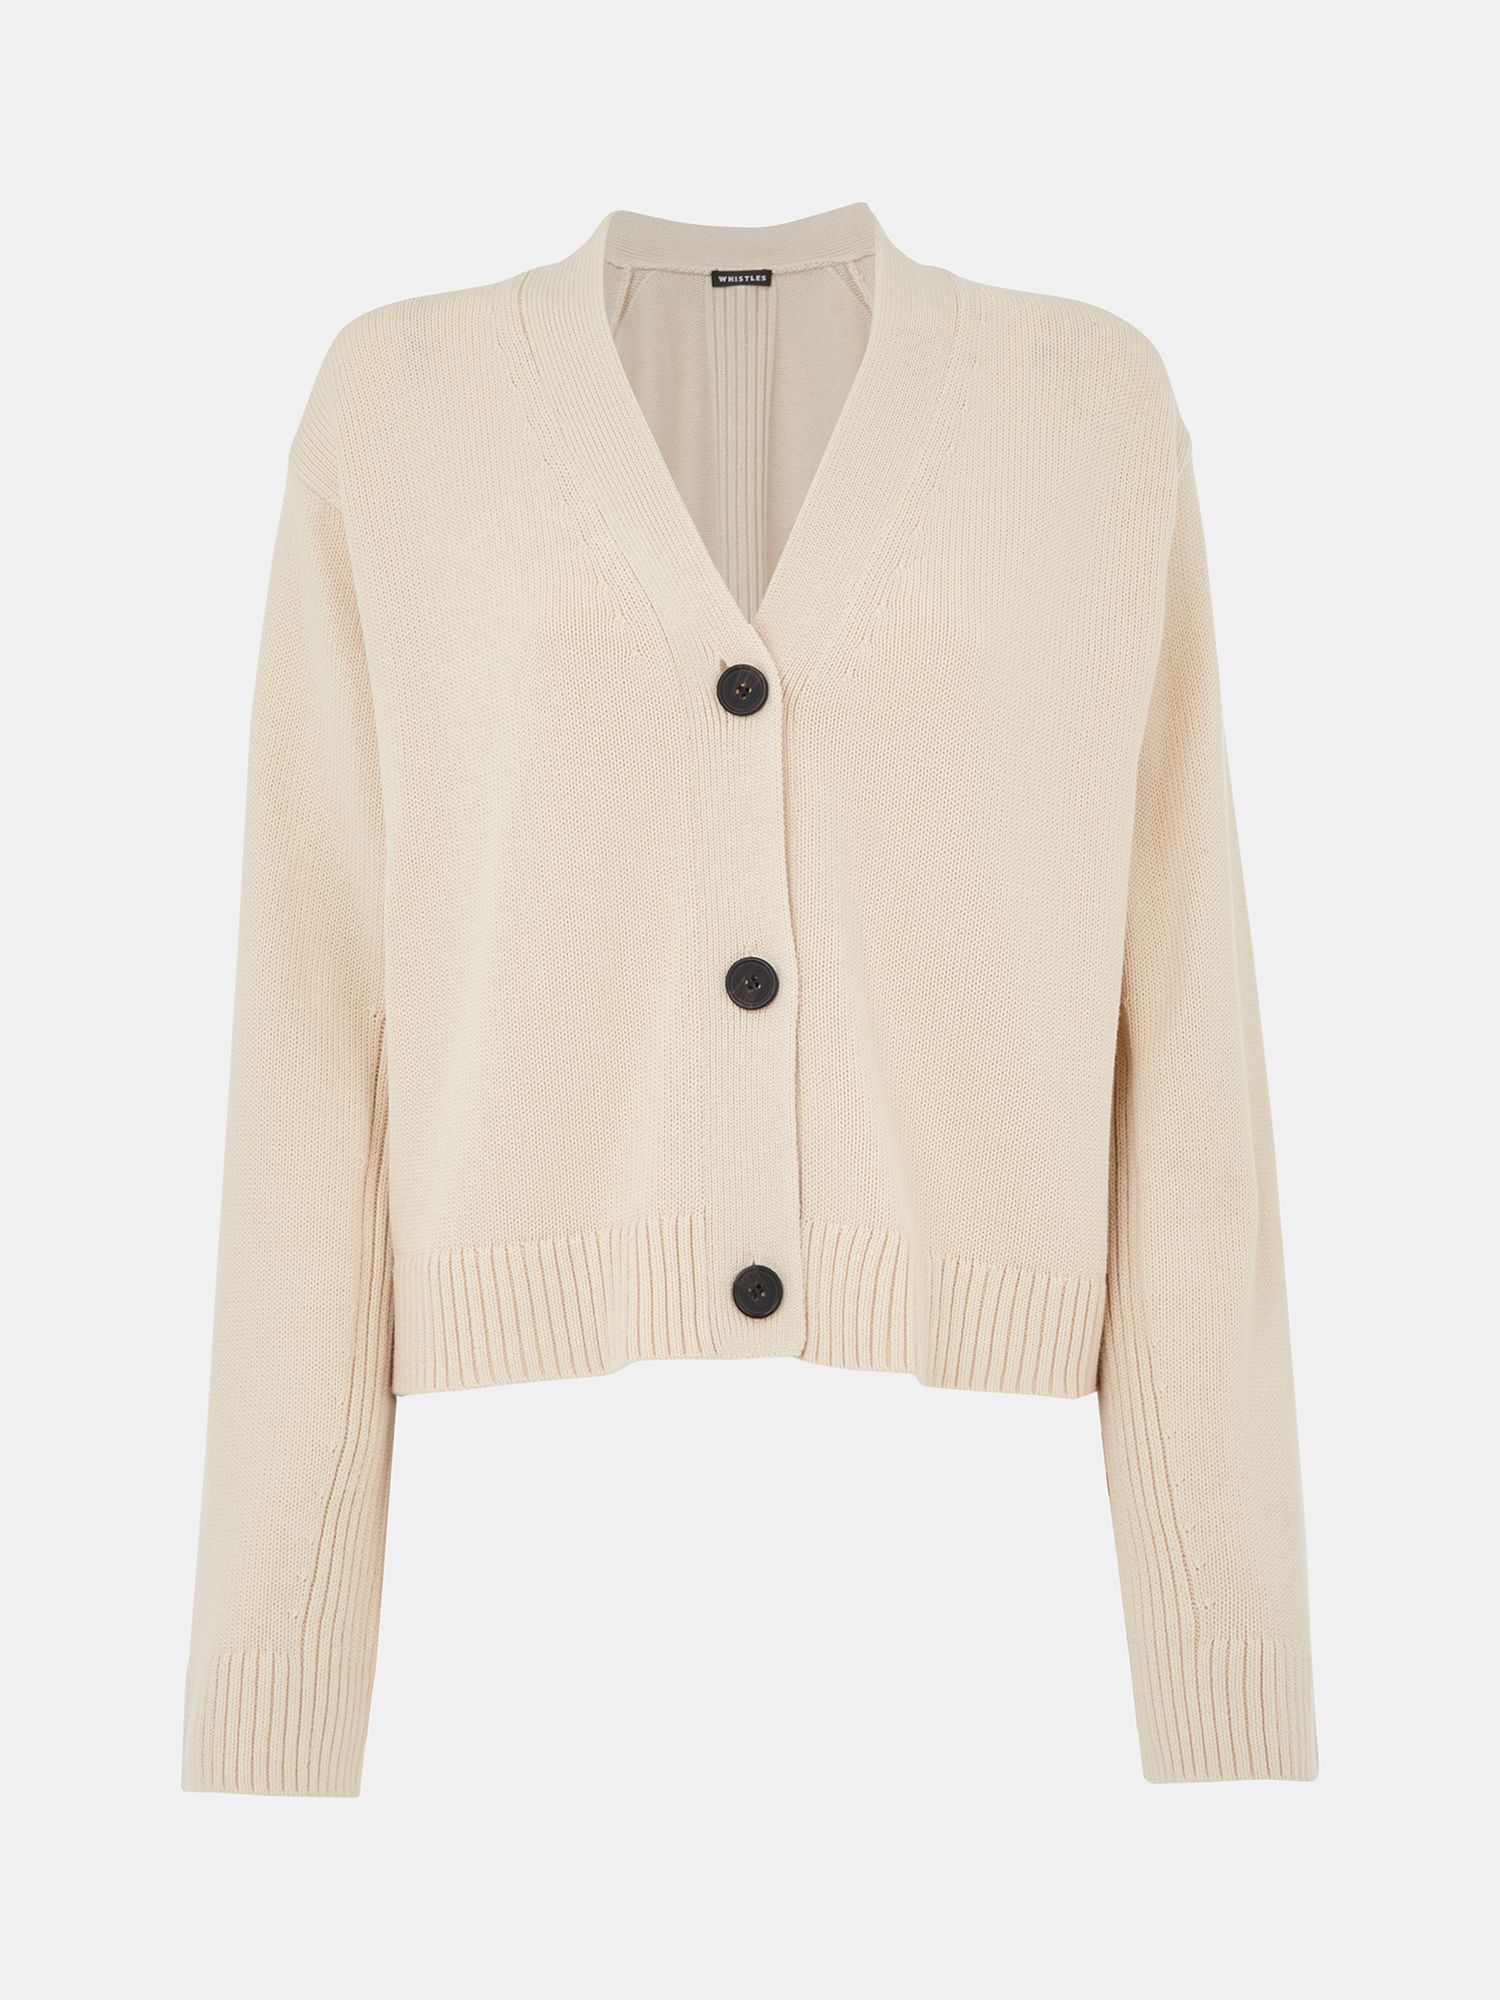 Buy Whistles Nina Button Front Cardigan Online at johnlewis.com